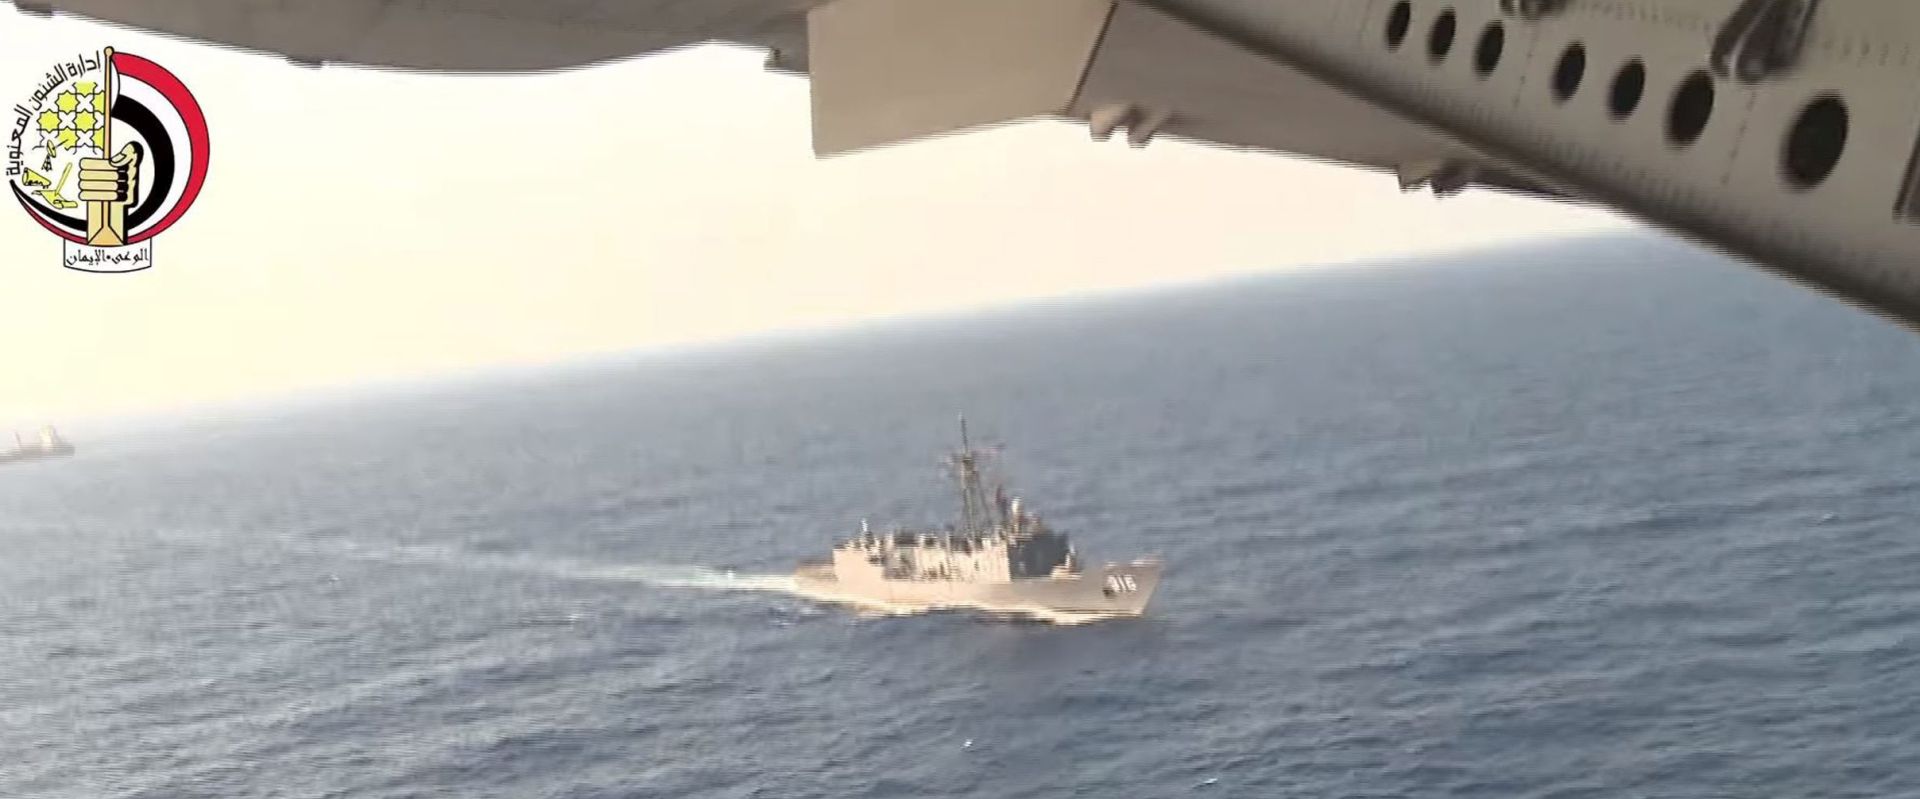 epa05318882 A screen grab taken from a handout video obtained from the Egyptian Defence Ministry on 20 May 2016 shows Egyptian Navy engaged in search operations for missing EgyptAir flight MS804 at sea off the Egyptian coast, north of Alexandria, Egypt, 19 May 2016. The Armed Forces of Egypt announced that the debris of an EgyptAir Airbus A320, which had disappeared early on 19 May 2016, as well as personal belongings of the passengers are floating in the Mediterranean Sea, north of the Egyptian city of Alexandria. The EgyptAir passenger jet had left Paris bound for Cairo with 66 people on board, but crashed into the Mediterranean Sea early for unknown reasons.  EPA/EGYPTIAN DEFENCE MINISTRY/HANDOUT  HANDOUT EDITORIAL USE ONLY/NO SALES